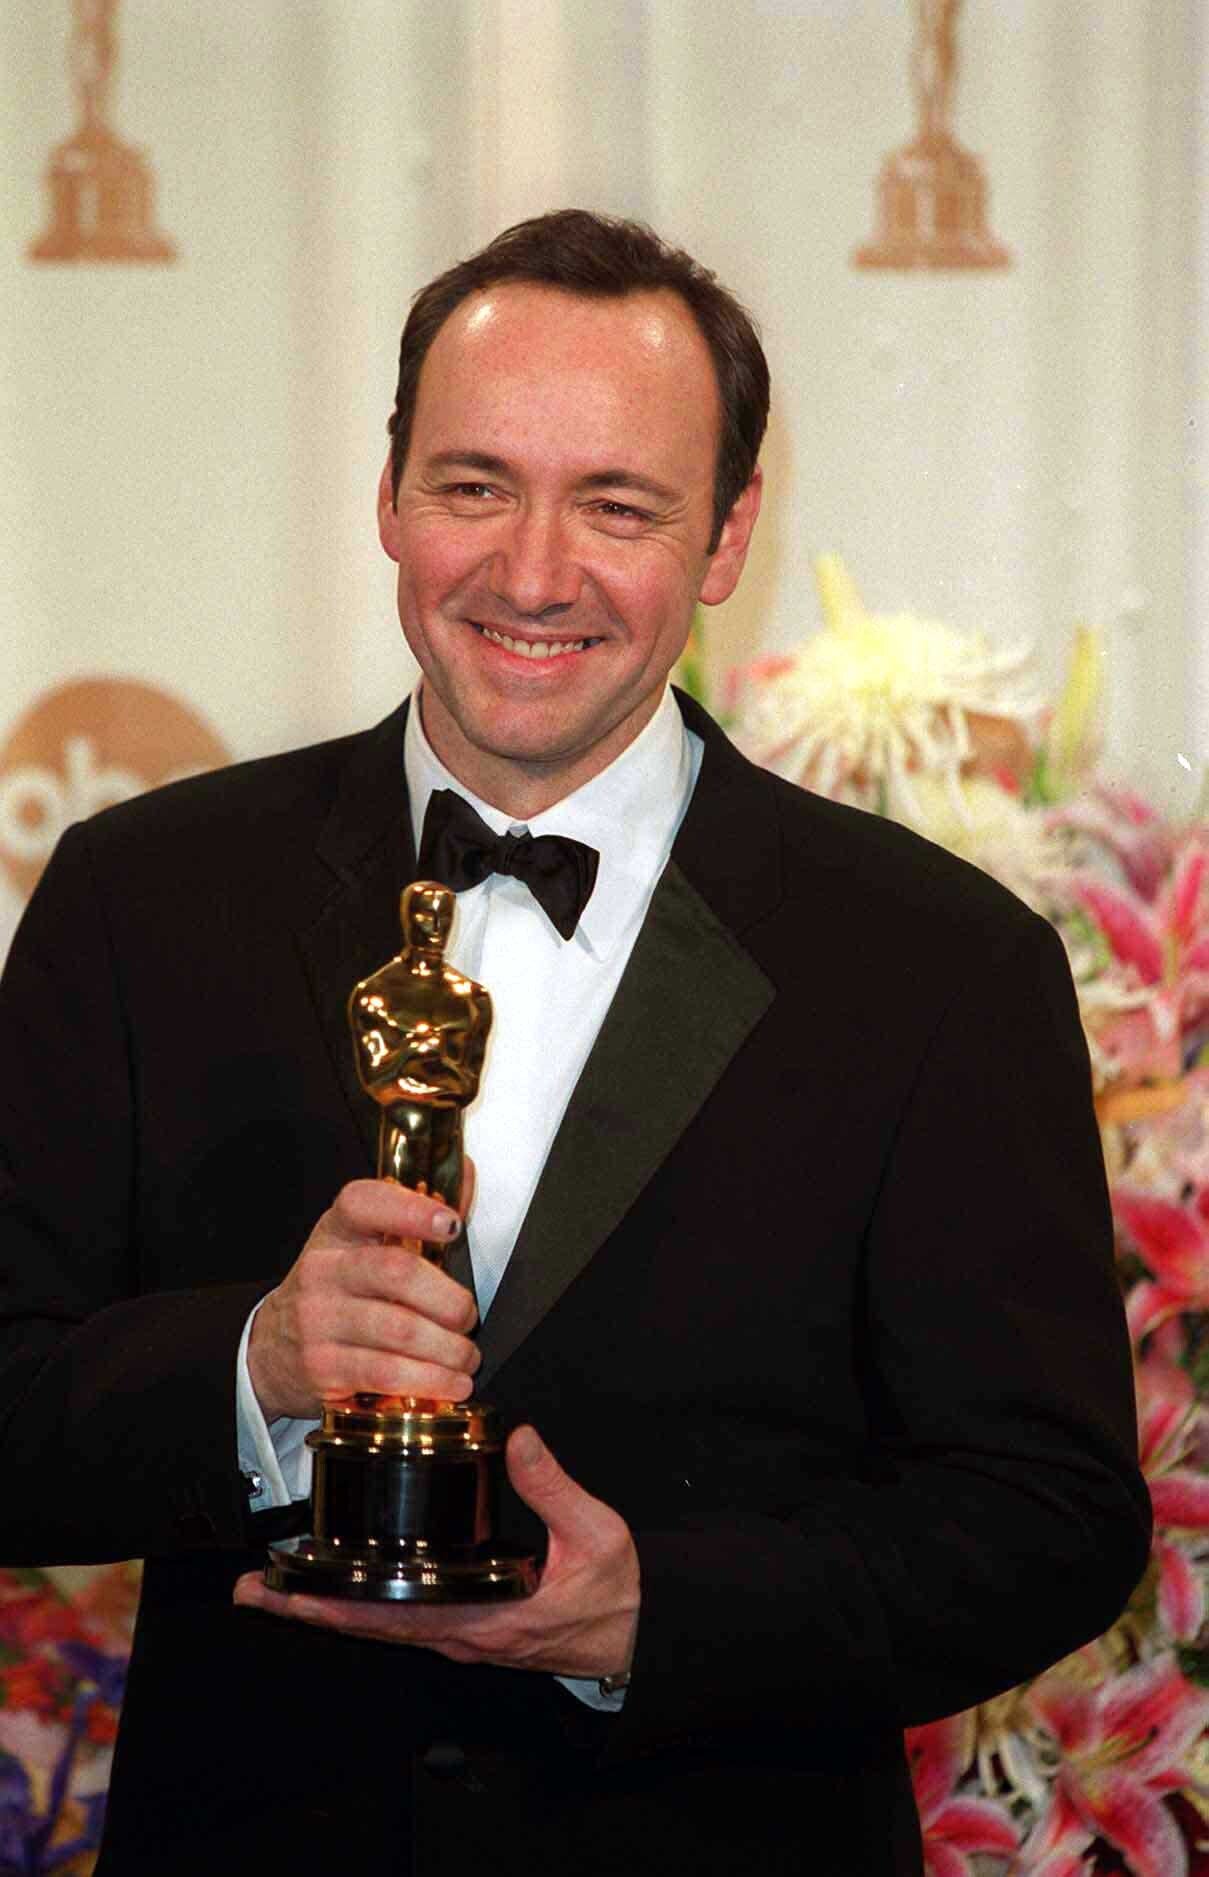 Spacey is a two-time Oscar winner and known for starring roles in American Beauty, The Usual Suspects and House Of Cards